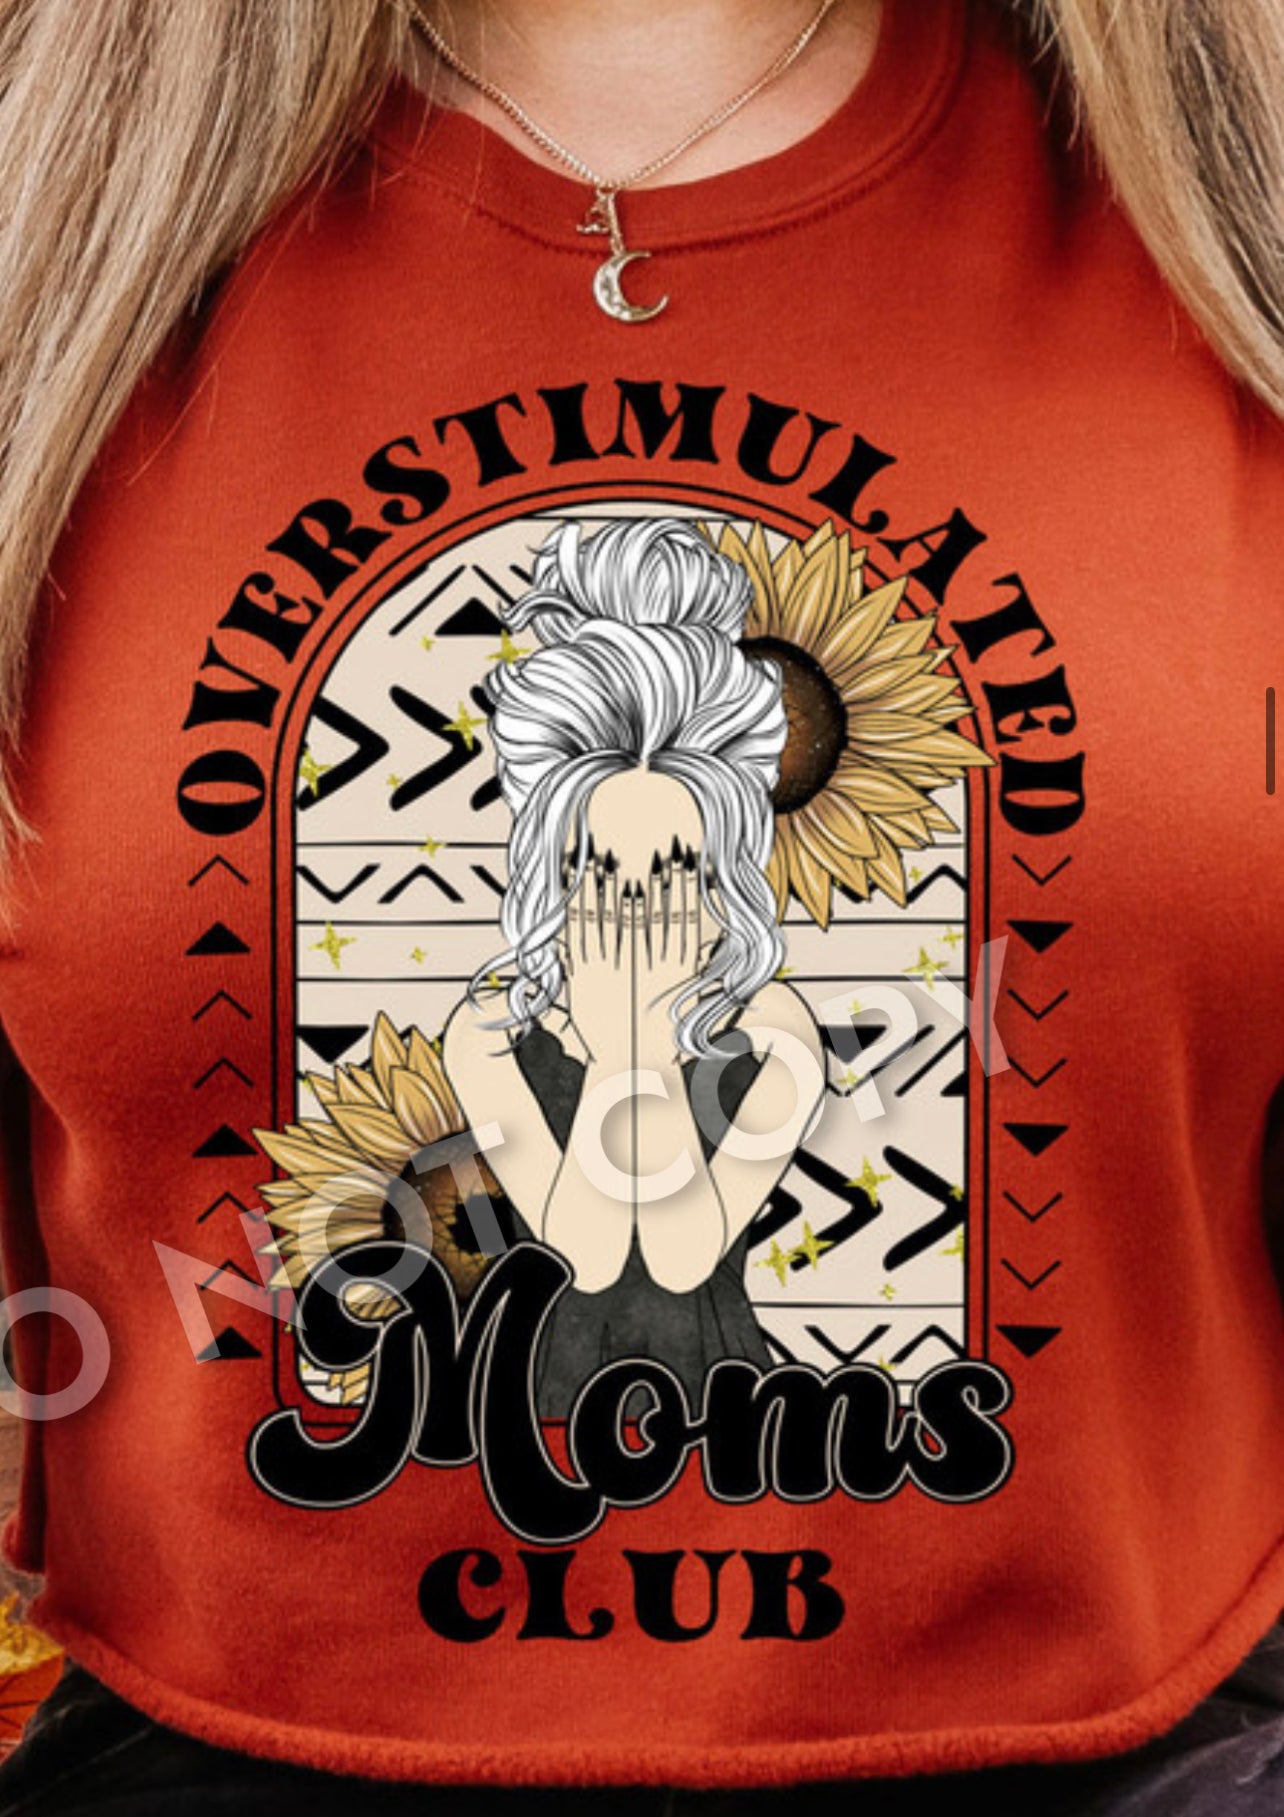 Overstimulated Moms Club - AnnRose Boutique